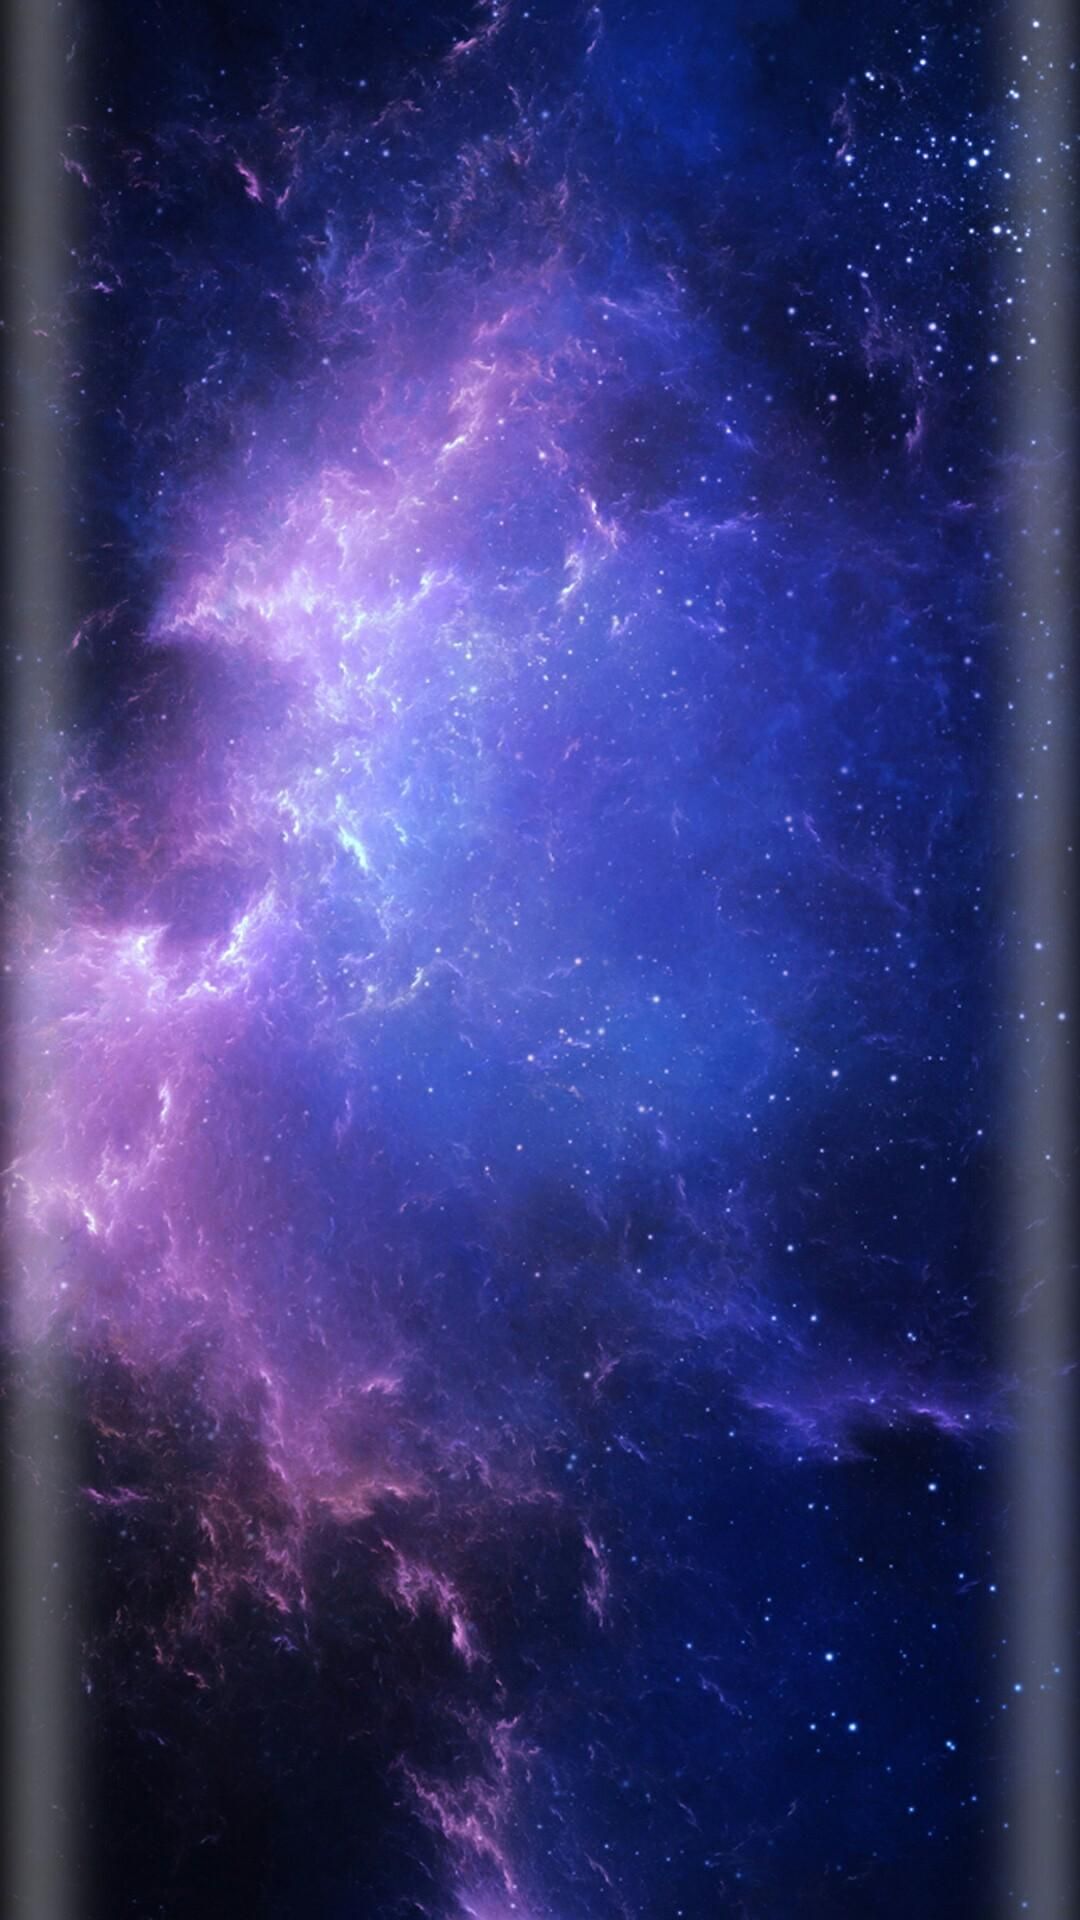 2.5D Curved Edge effect wallpaper. Purple galaxy wallpaper, Galaxy picture, Galaxy background